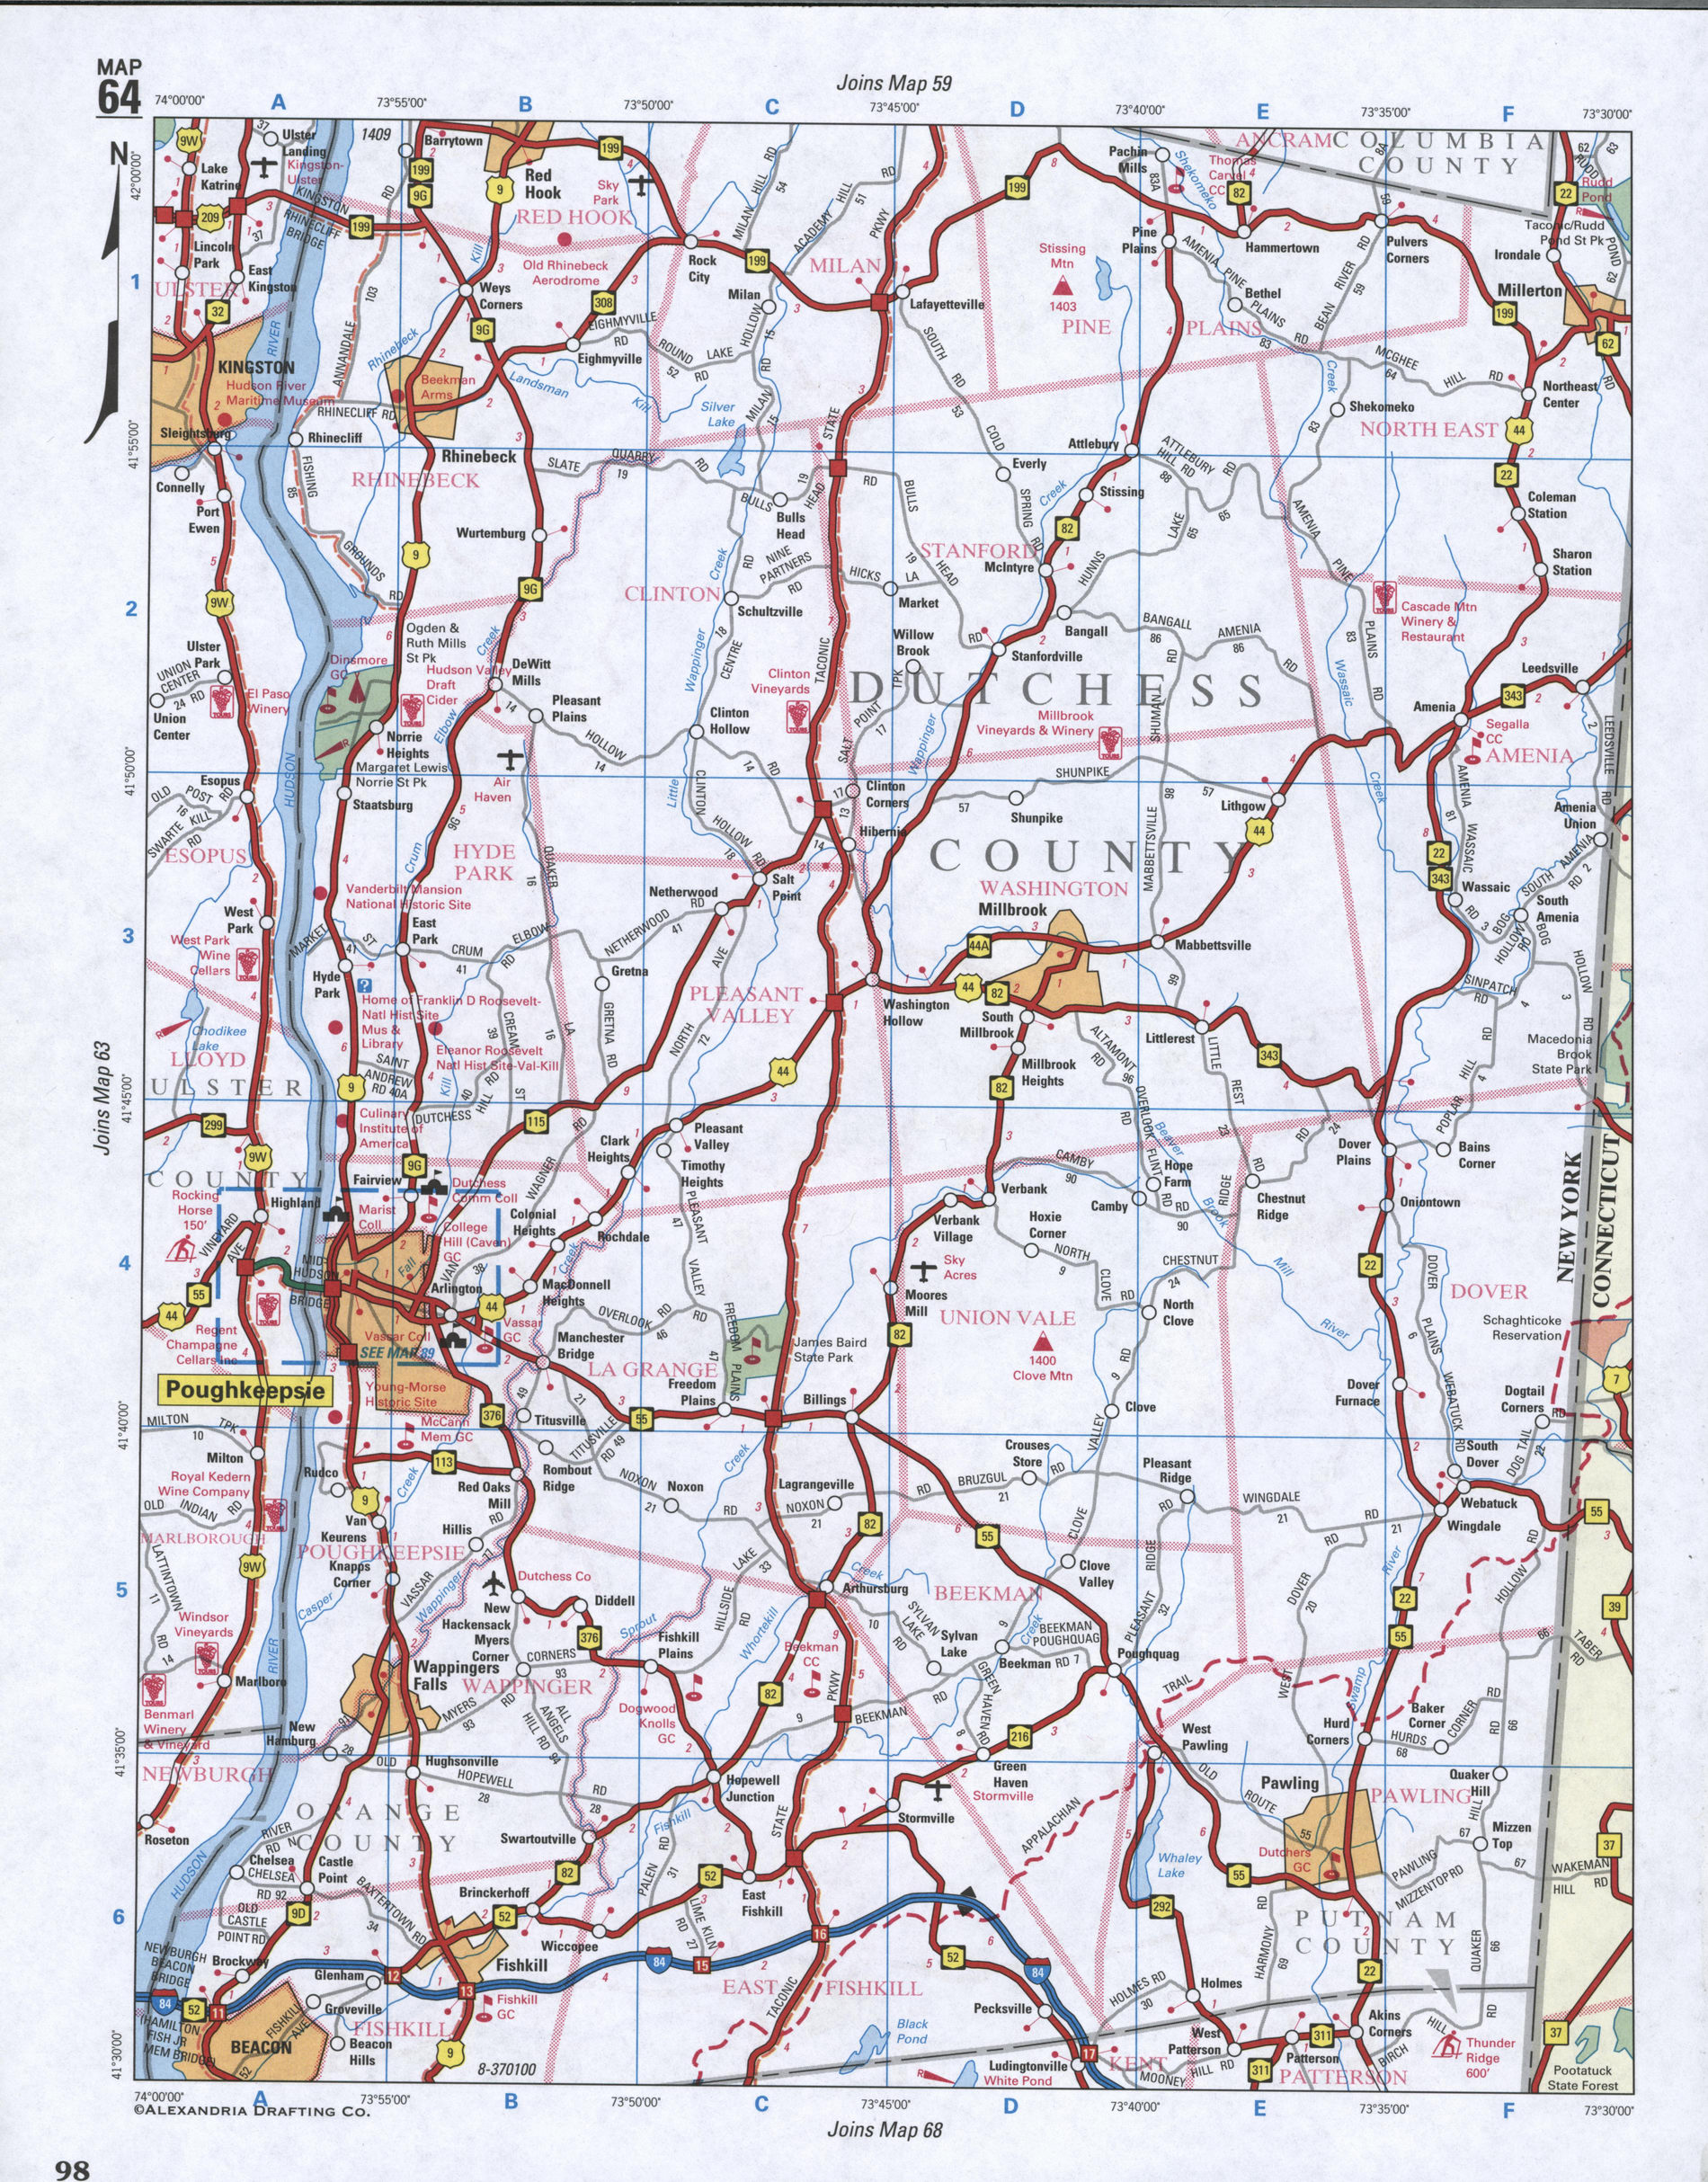 Map of Dutchess County, New York state